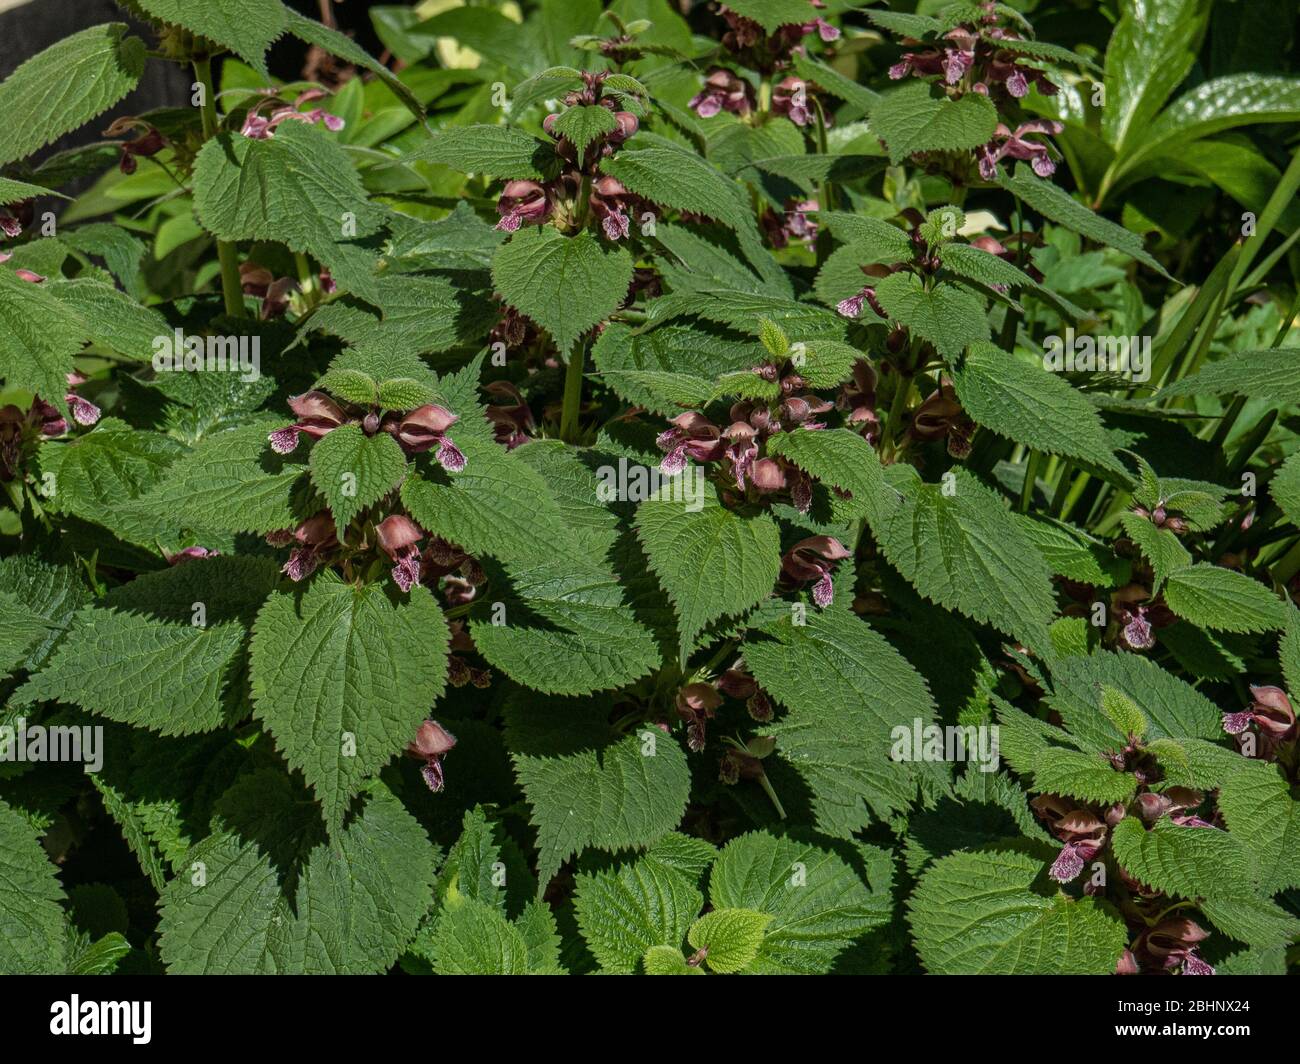 The flowers and deeply cut foliage of Lamium orvala Stock Photo